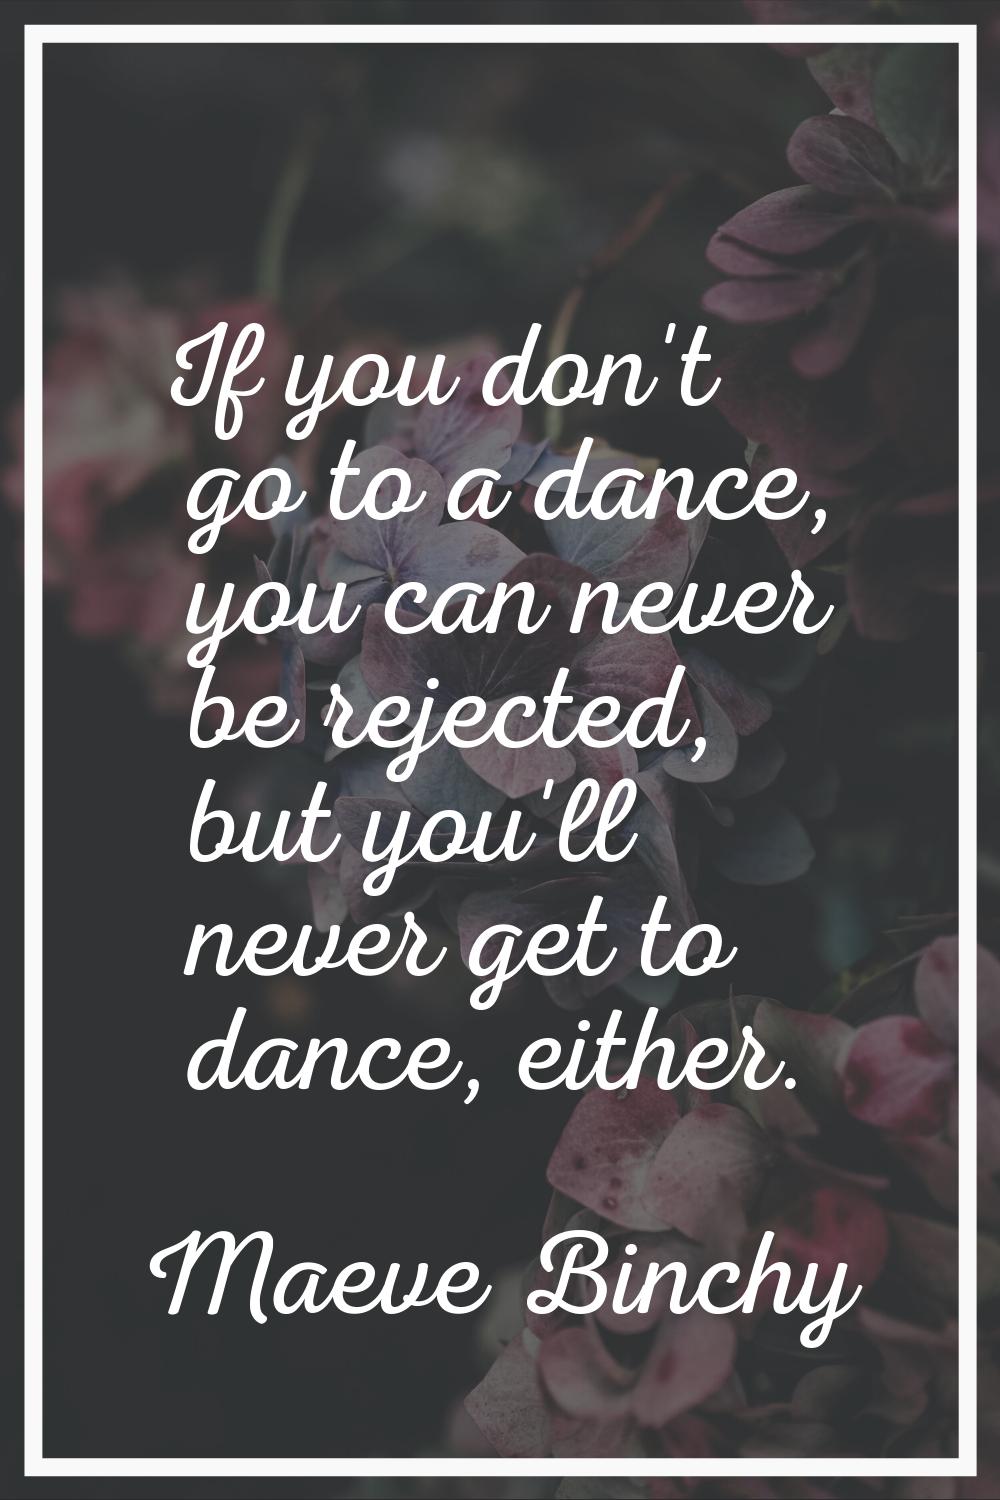 If you don't go to a dance, you can never be rejected, but you'll never get to dance, either.